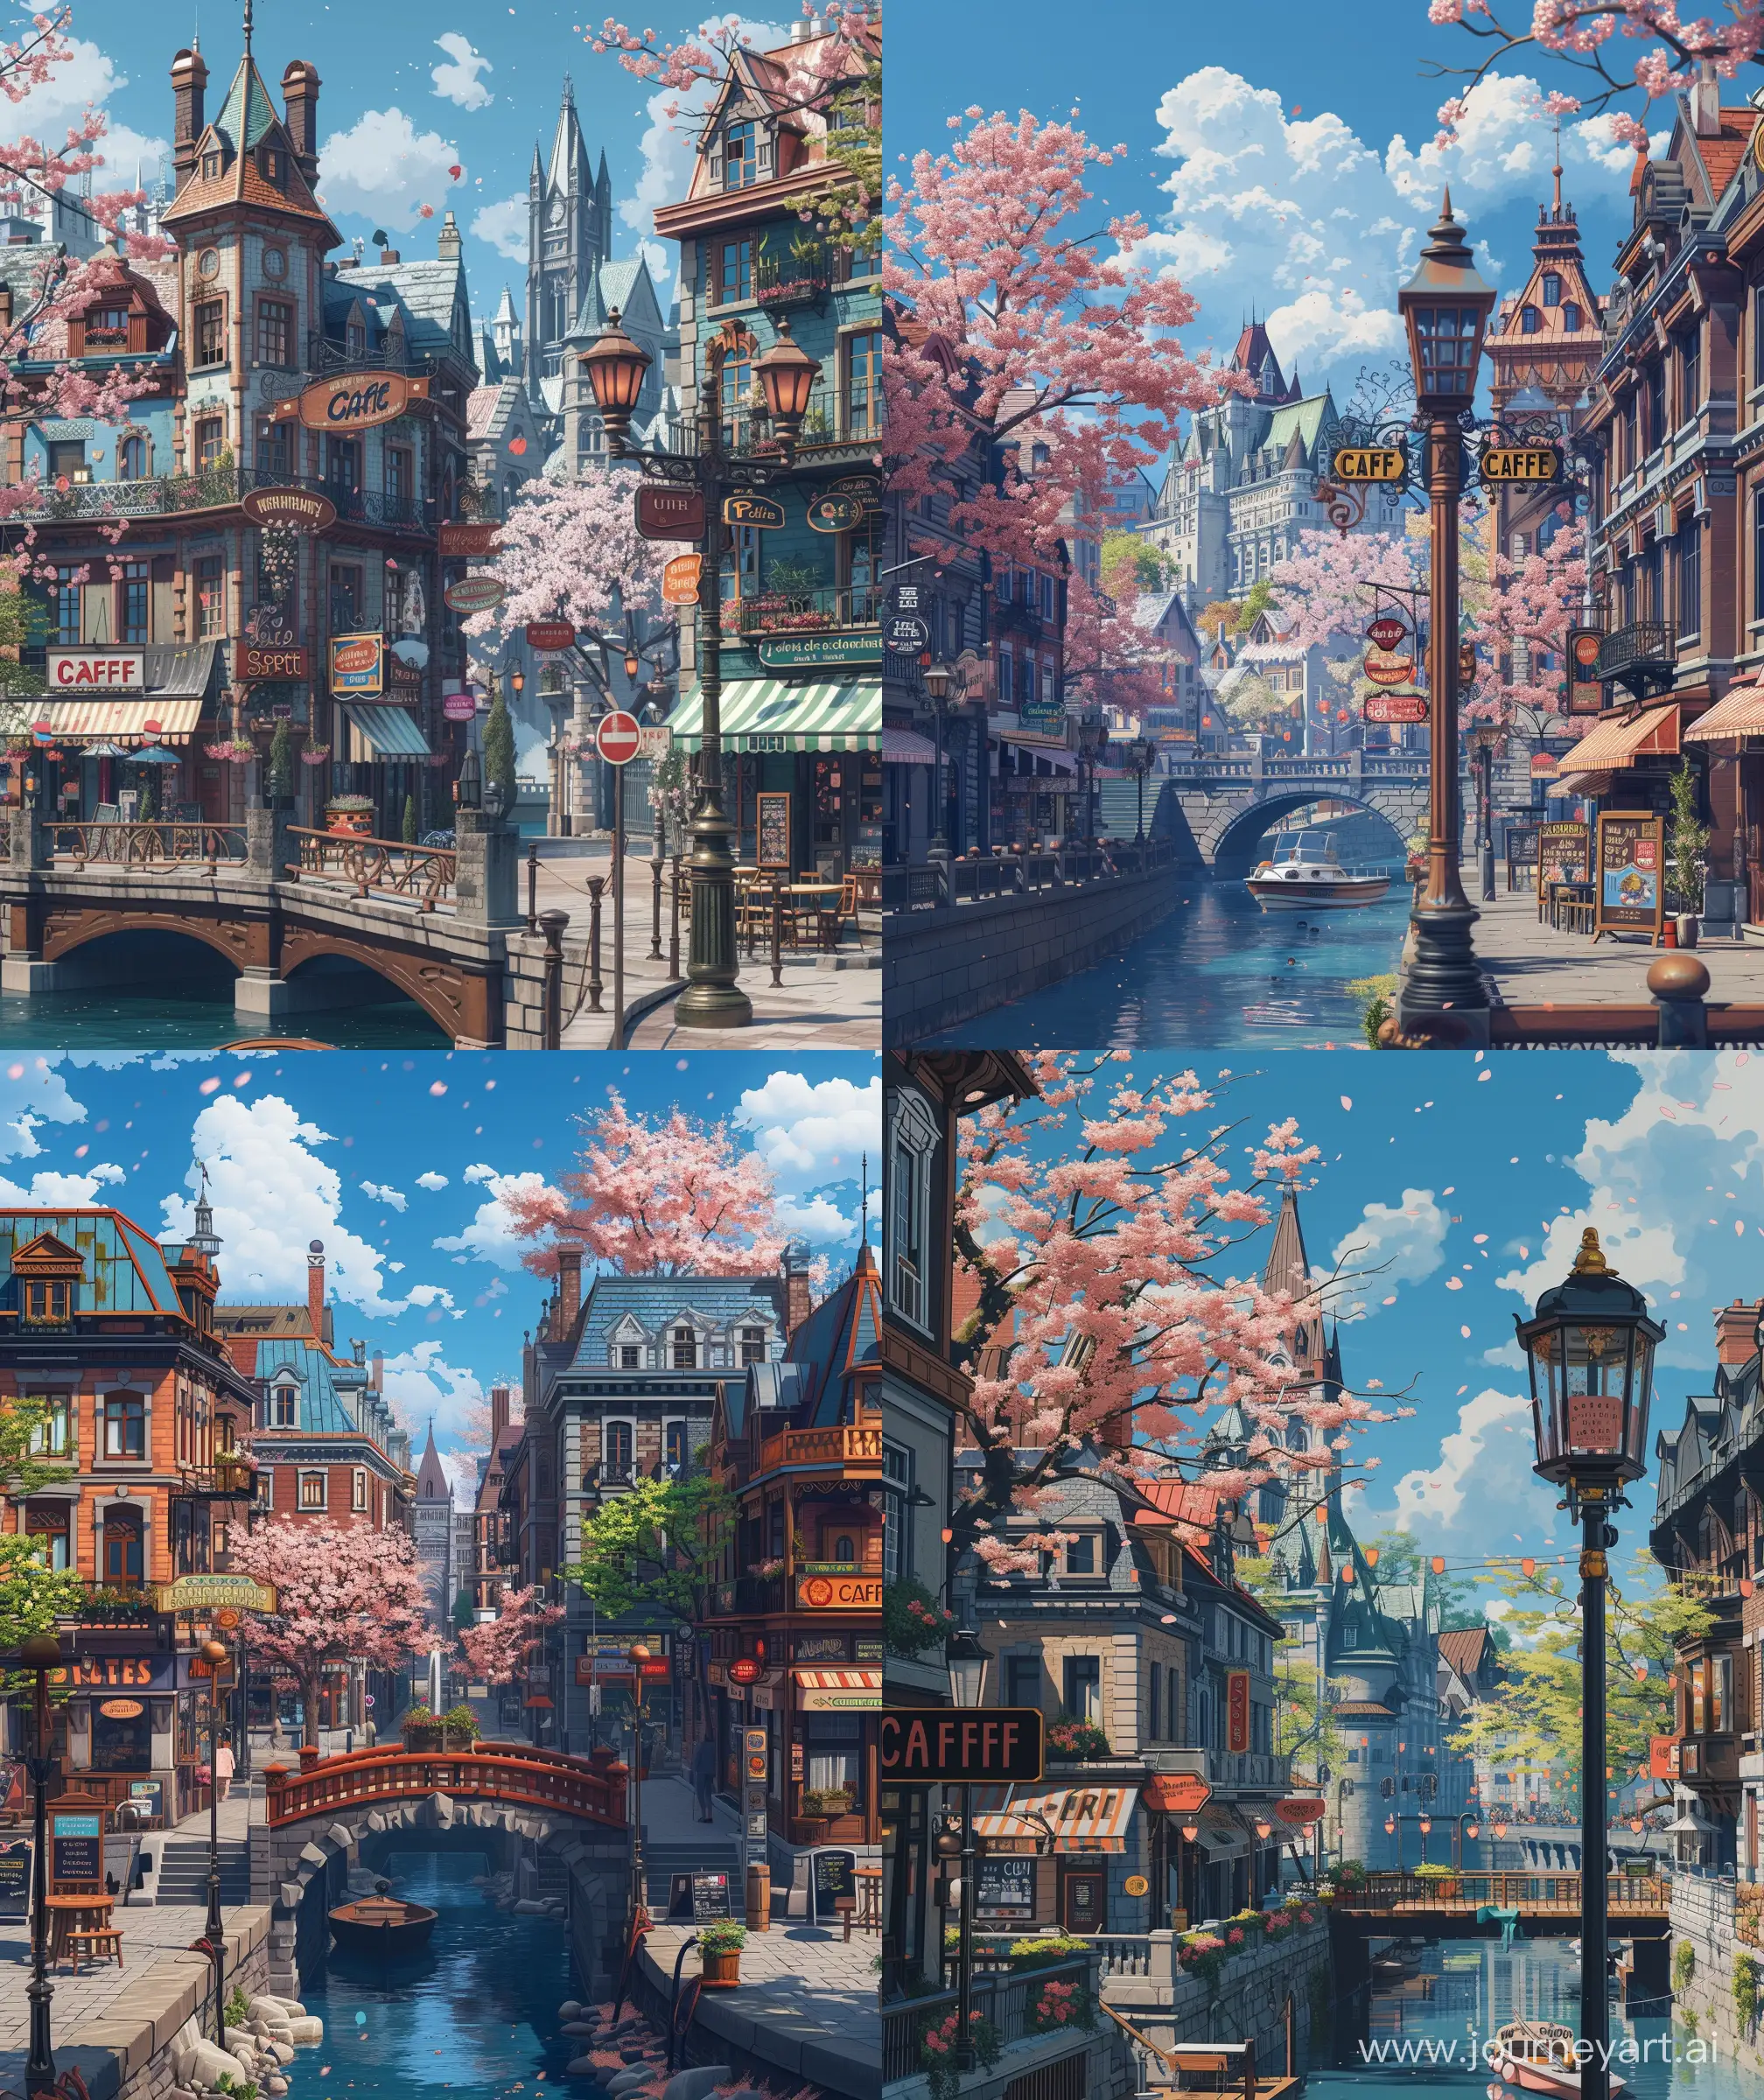 Beautiful anime scenary, Ghibli style,  down town Verious scanes like  "cafe", "bridge with river" , "boating spot", "town square fountain",  illustration beautiful sign, cherry blossom tree, beside building, old but beautiful building, anime scenes, blue sky, morning, old lamp post, aesthetic look, montreal canda, vibrant look, Ultra hd, sharp details, no hyperrealistic , --ar 27:32 --s 400